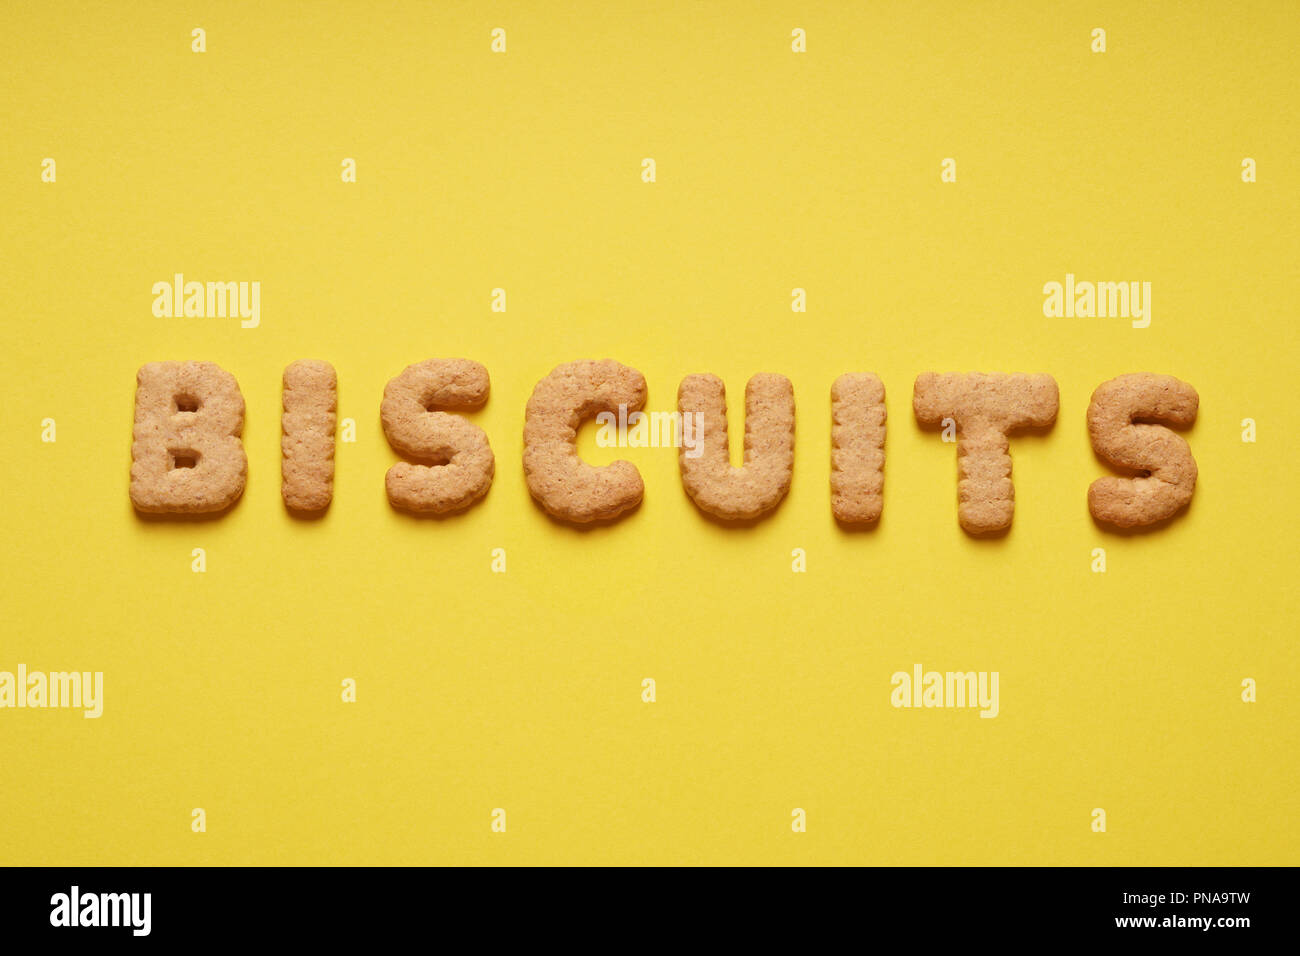 biscuits word spelled out with biscuit letters or characters on yellow paper background Stock Photo